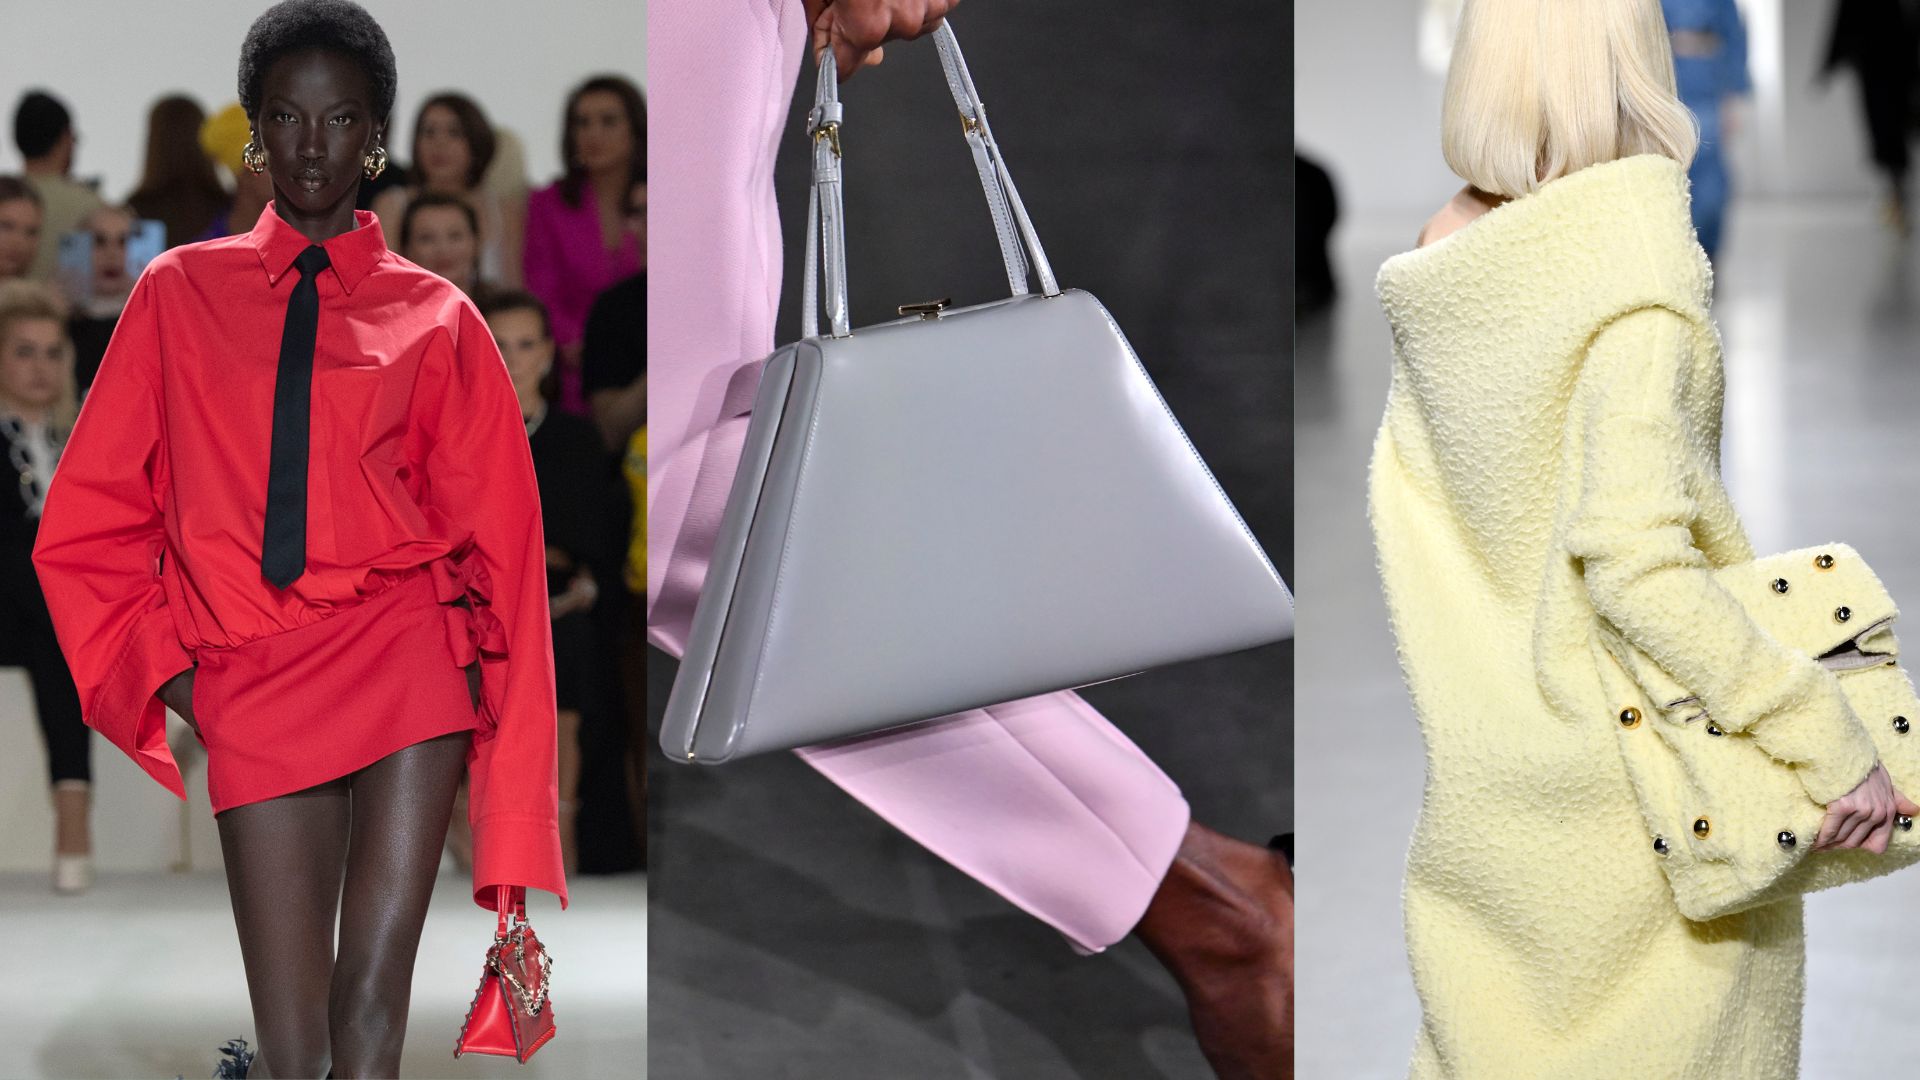 Big handbags that pack a luxe punch